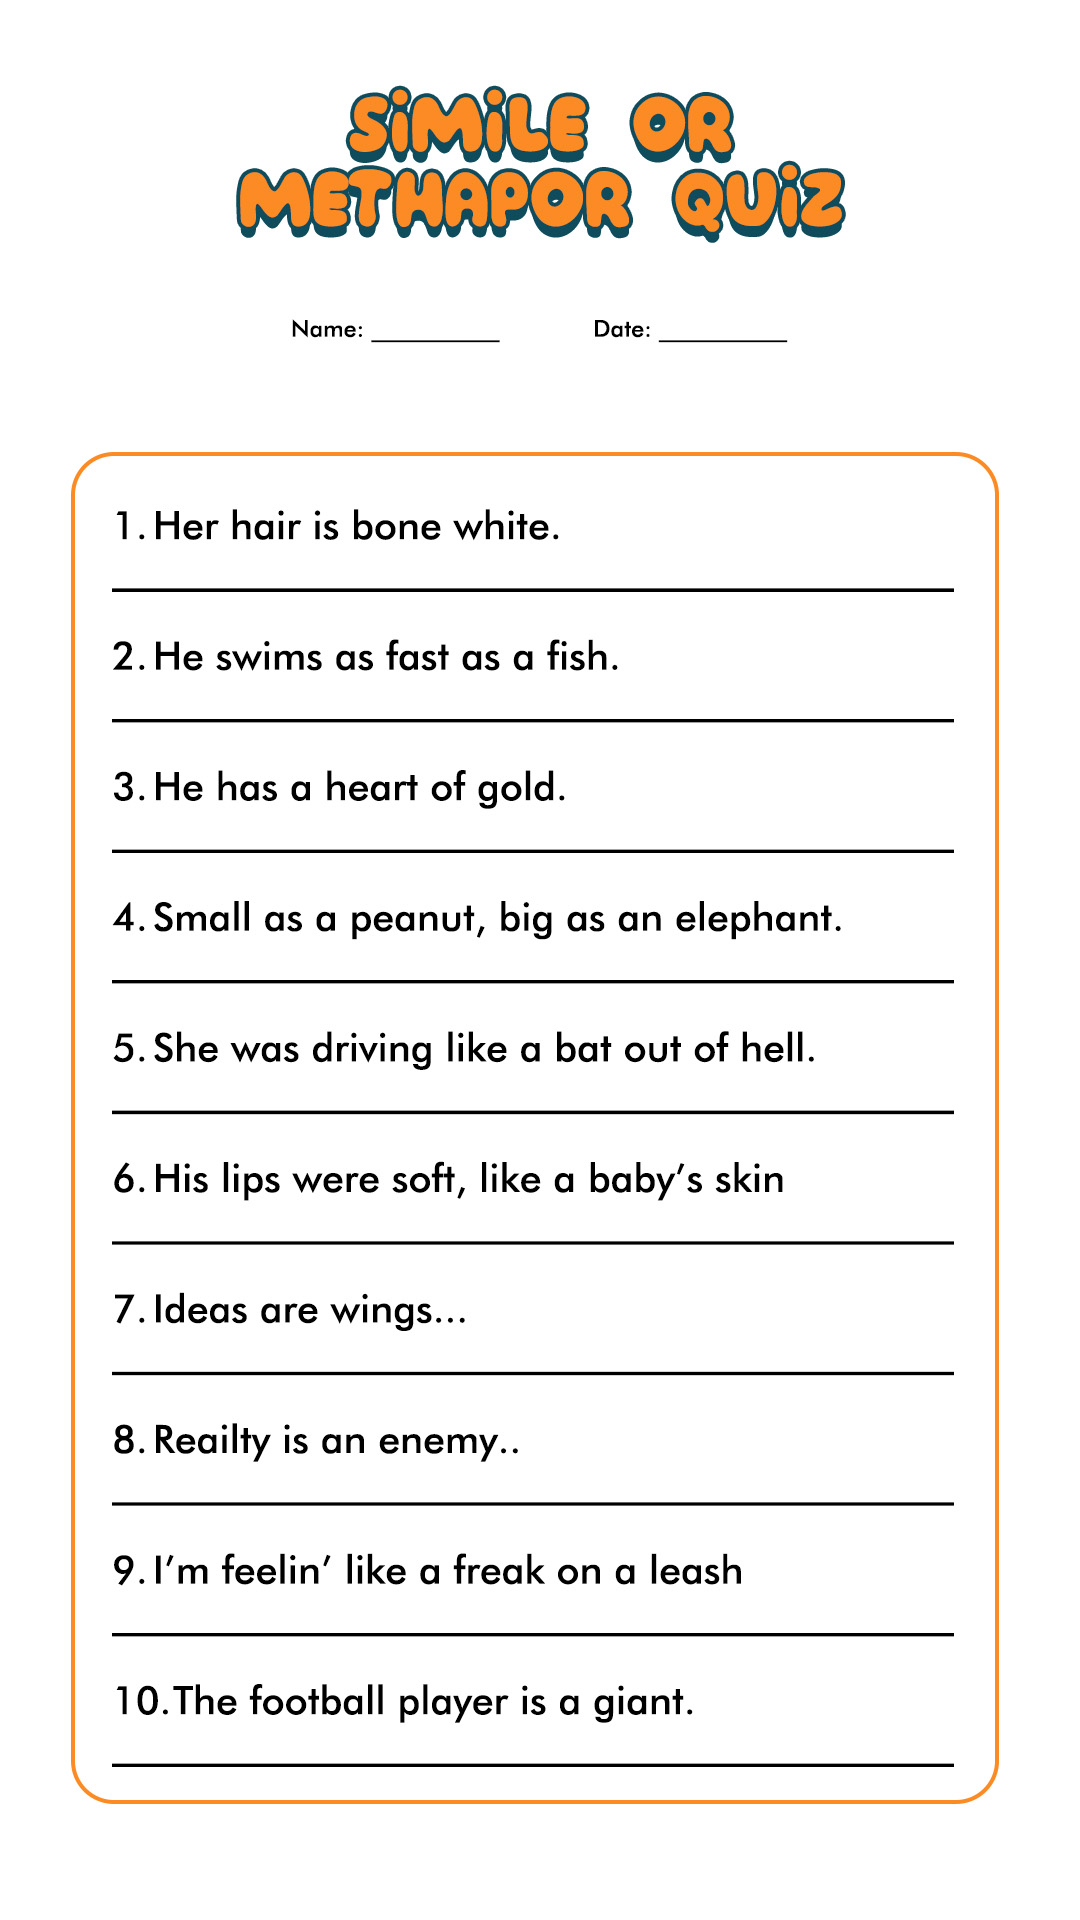 20 Best Images of Simile Metaphor Worksheets Middle School Simile and